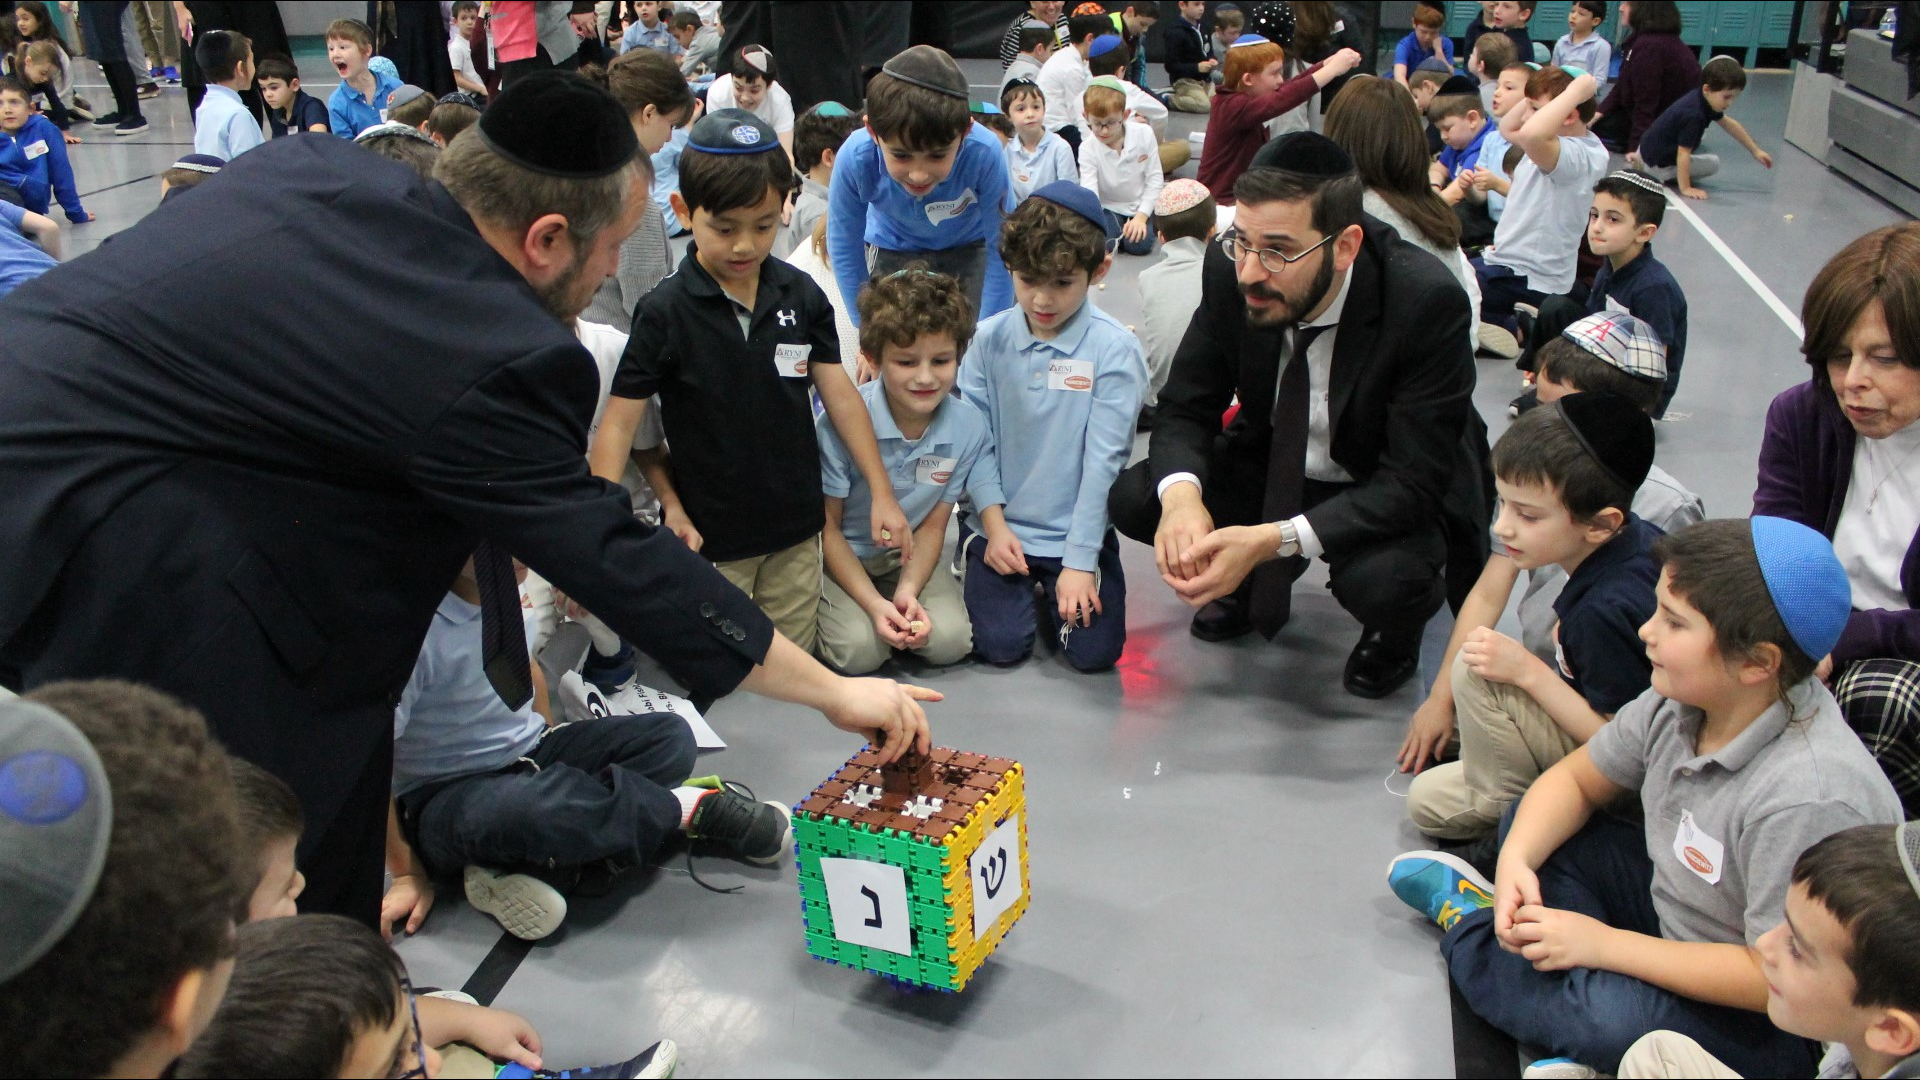 The company partnered with students and staff of the Rosenbaum Yeshiva of north New Jersey to spin a world record 1,369 dreidels at the same time!